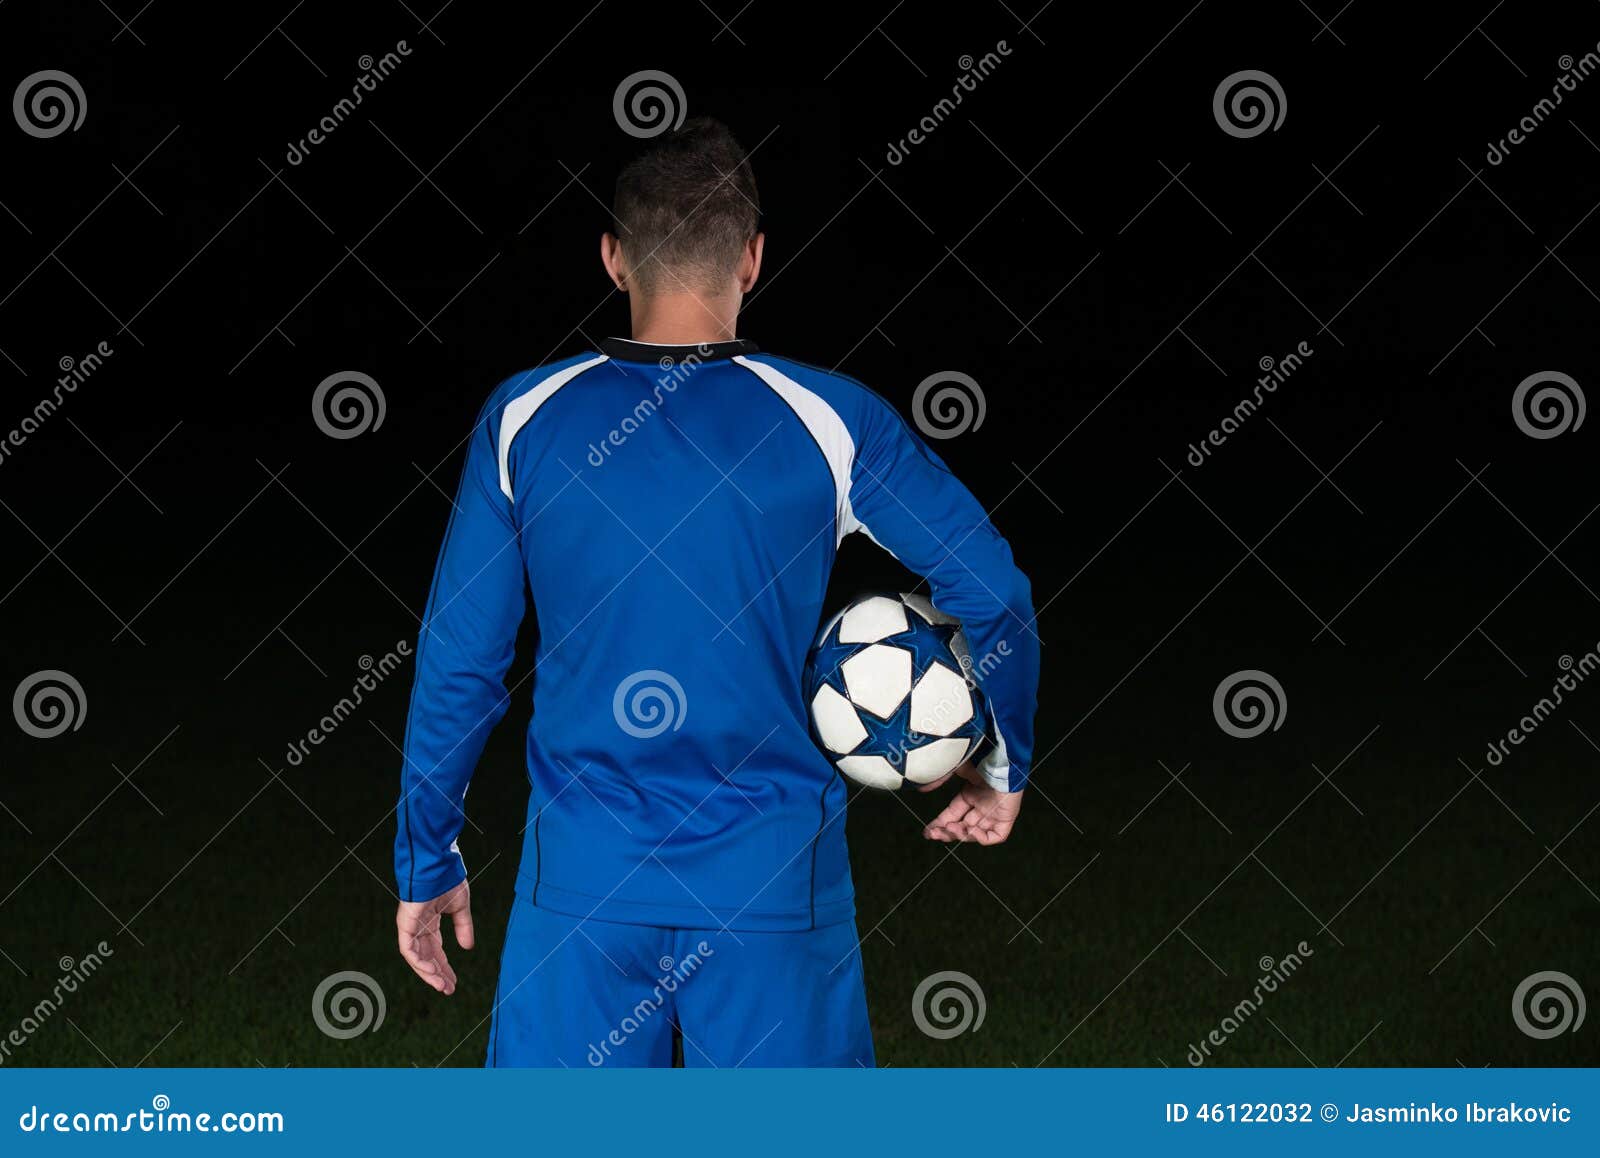 Download Back View Of Soccer Player On Black Background Stock Photo ...